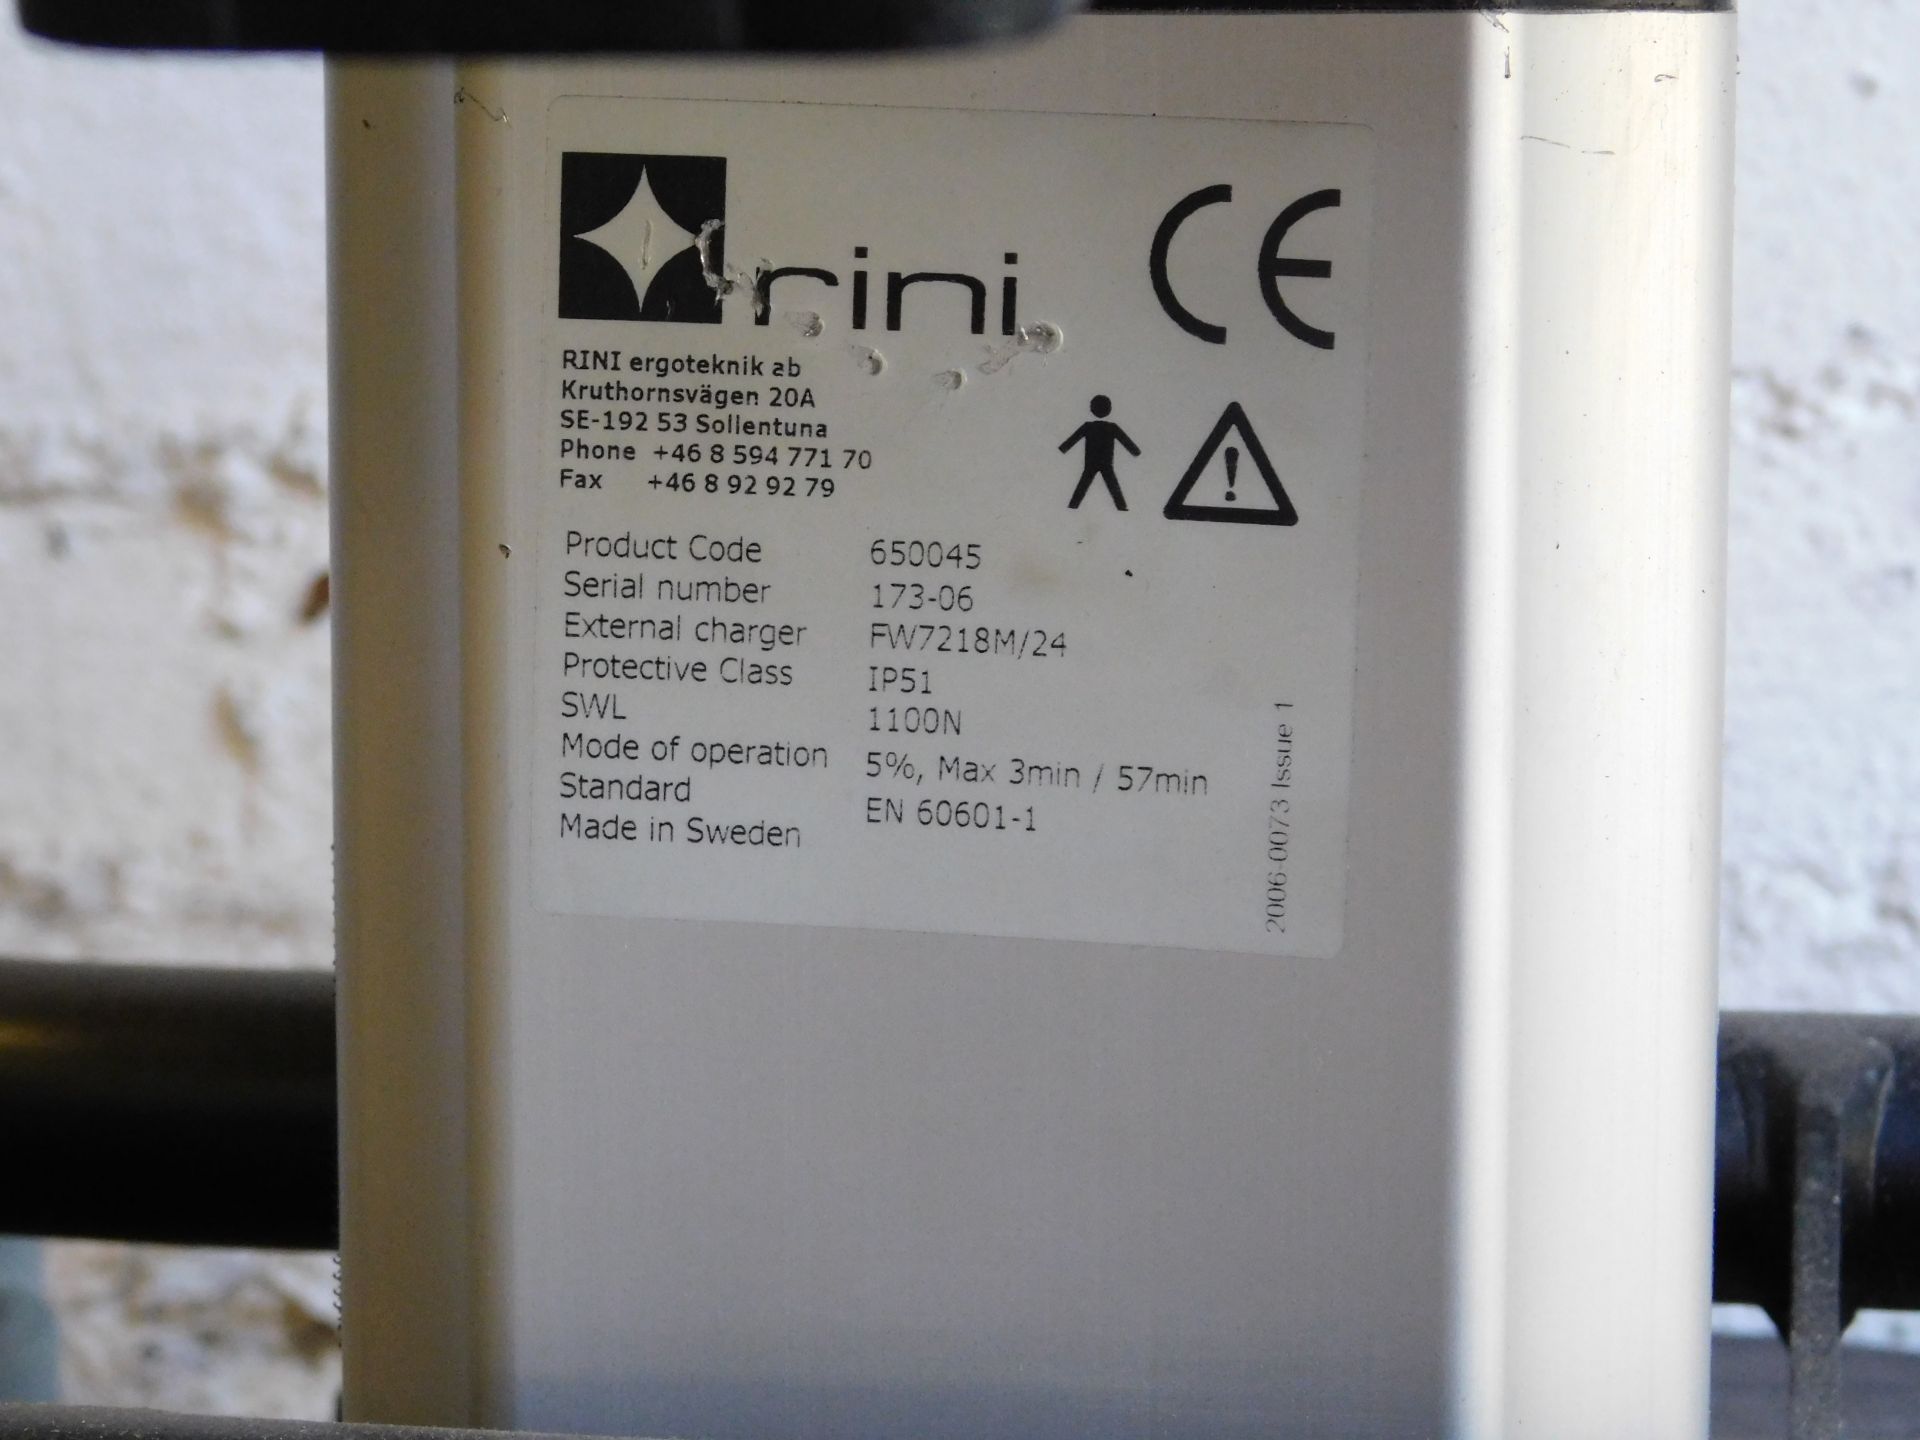 Rini HB41A00-00002 Ophthalmic Operating Chair, Serial Number 173-06 (Location: Bushey. Please - Image 3 of 4